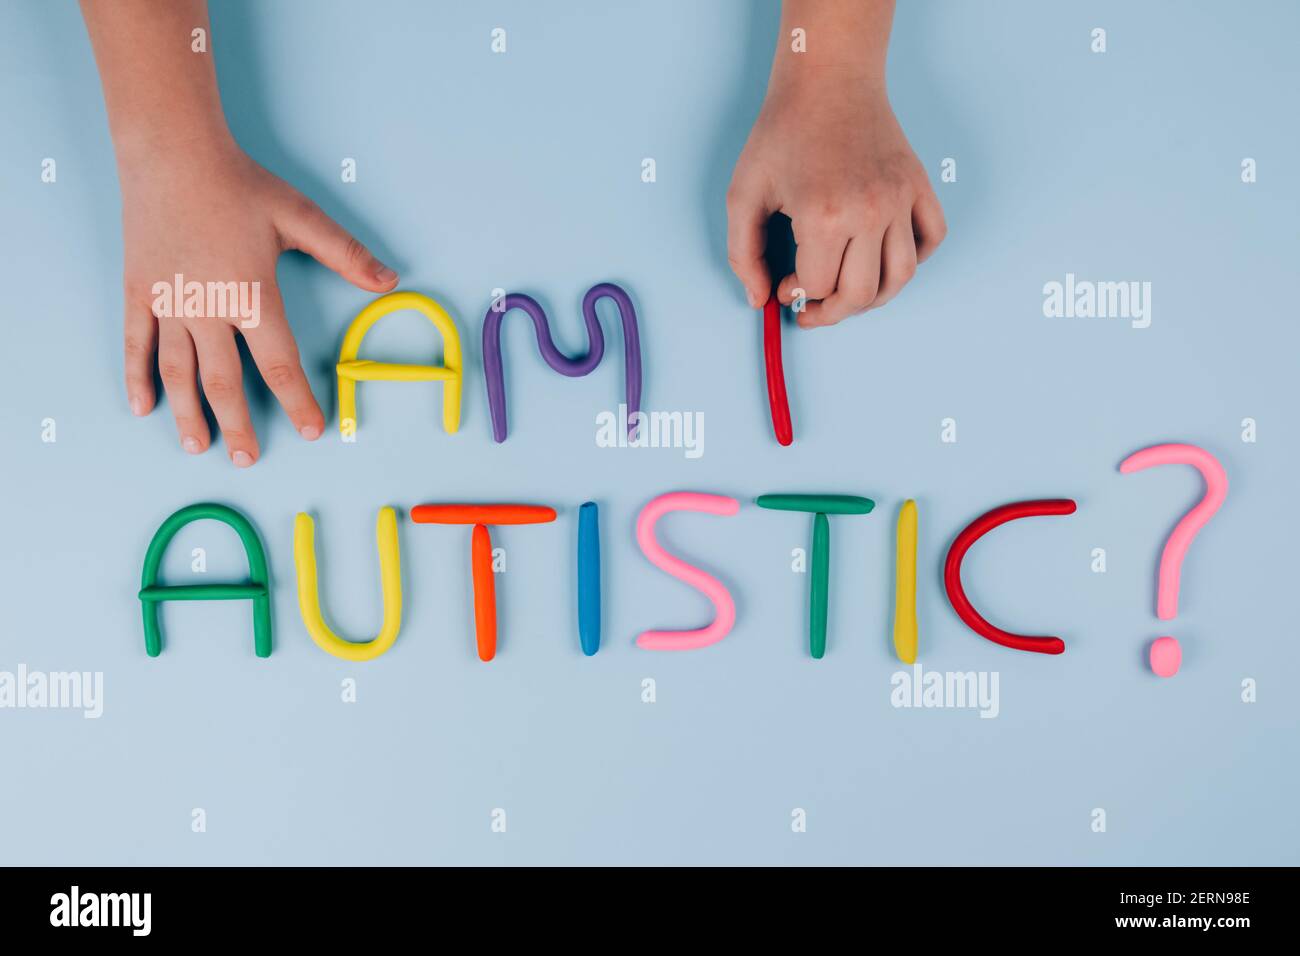 World Autism Awareness Day concept, symptoms - multicolored letters, Am I Autistic - on light blue background with child hand. Autism spectrum Stock Photo